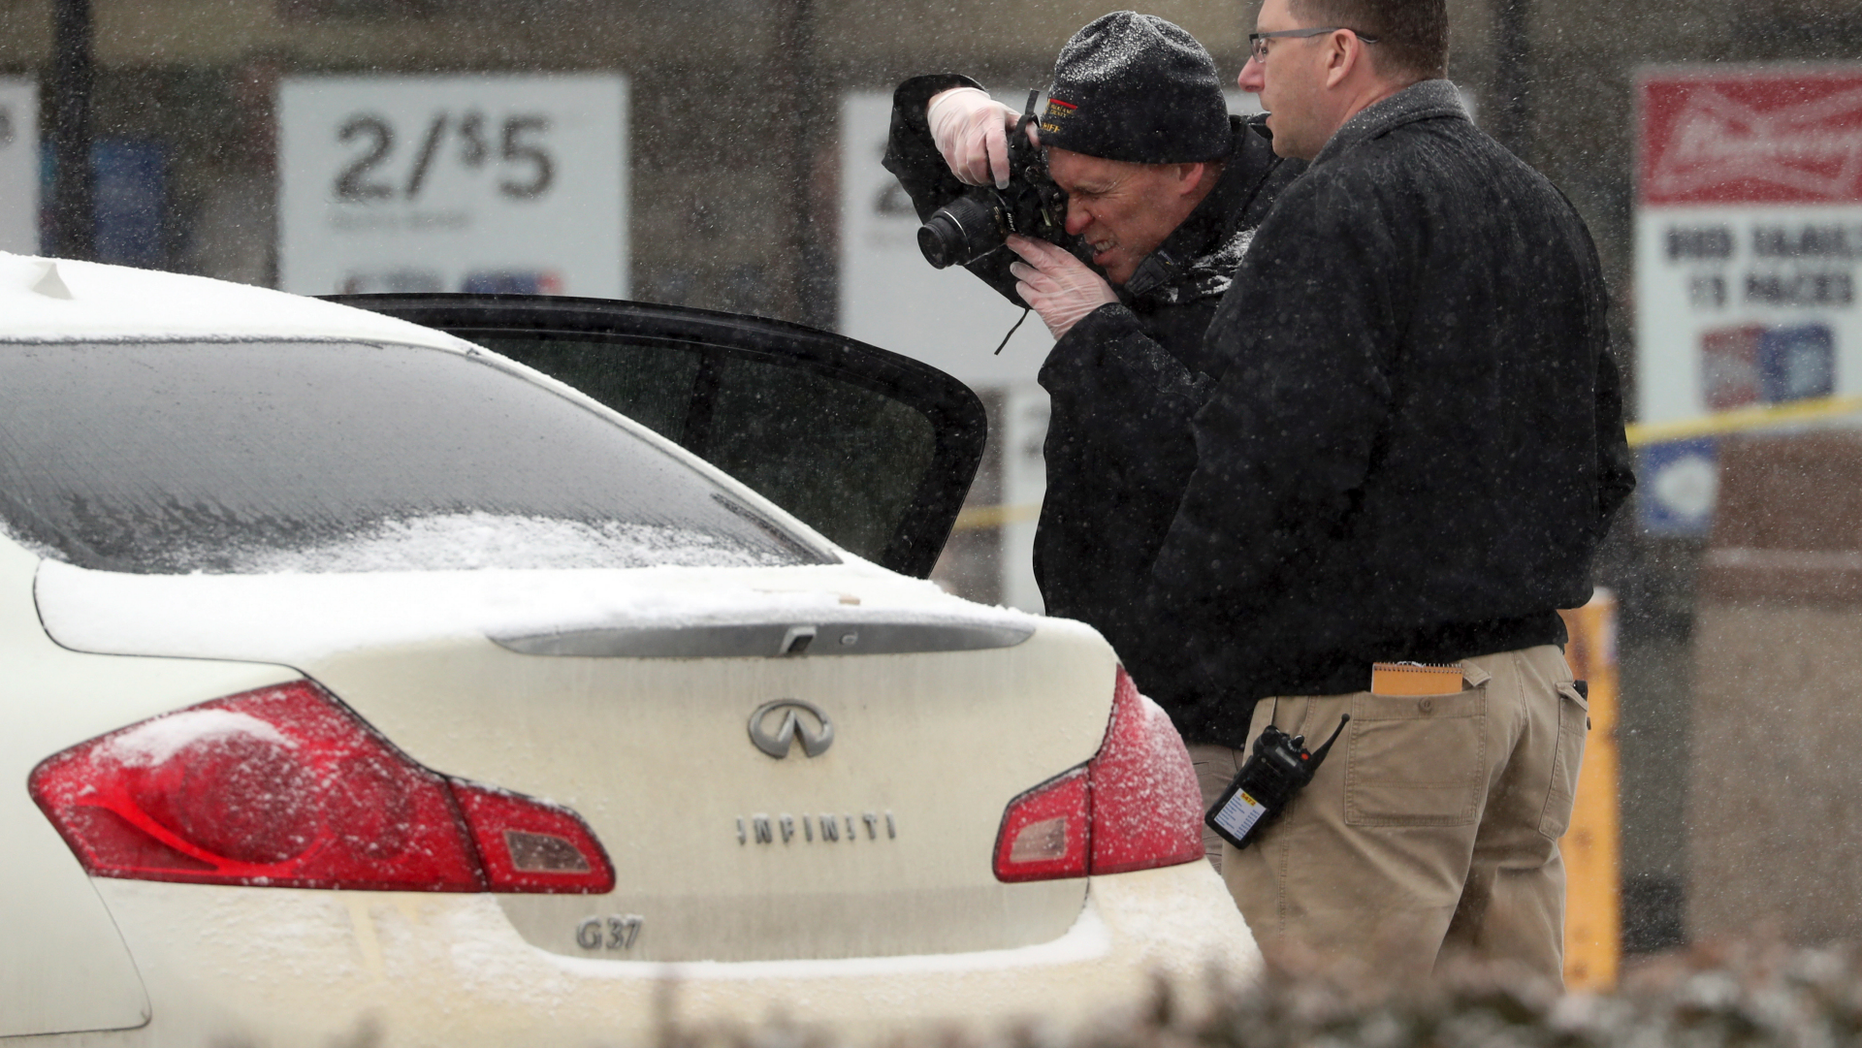 The investigators photographed a vehicle in front of a convenience store in Garnerville, New York on Wednesday, February 20, 2019, after the vehicle allegedly struck and injured several people, including five children. Police said the driver of the vehicle was arrested for interrogation. (Peter Carr / The News magazine via AP)